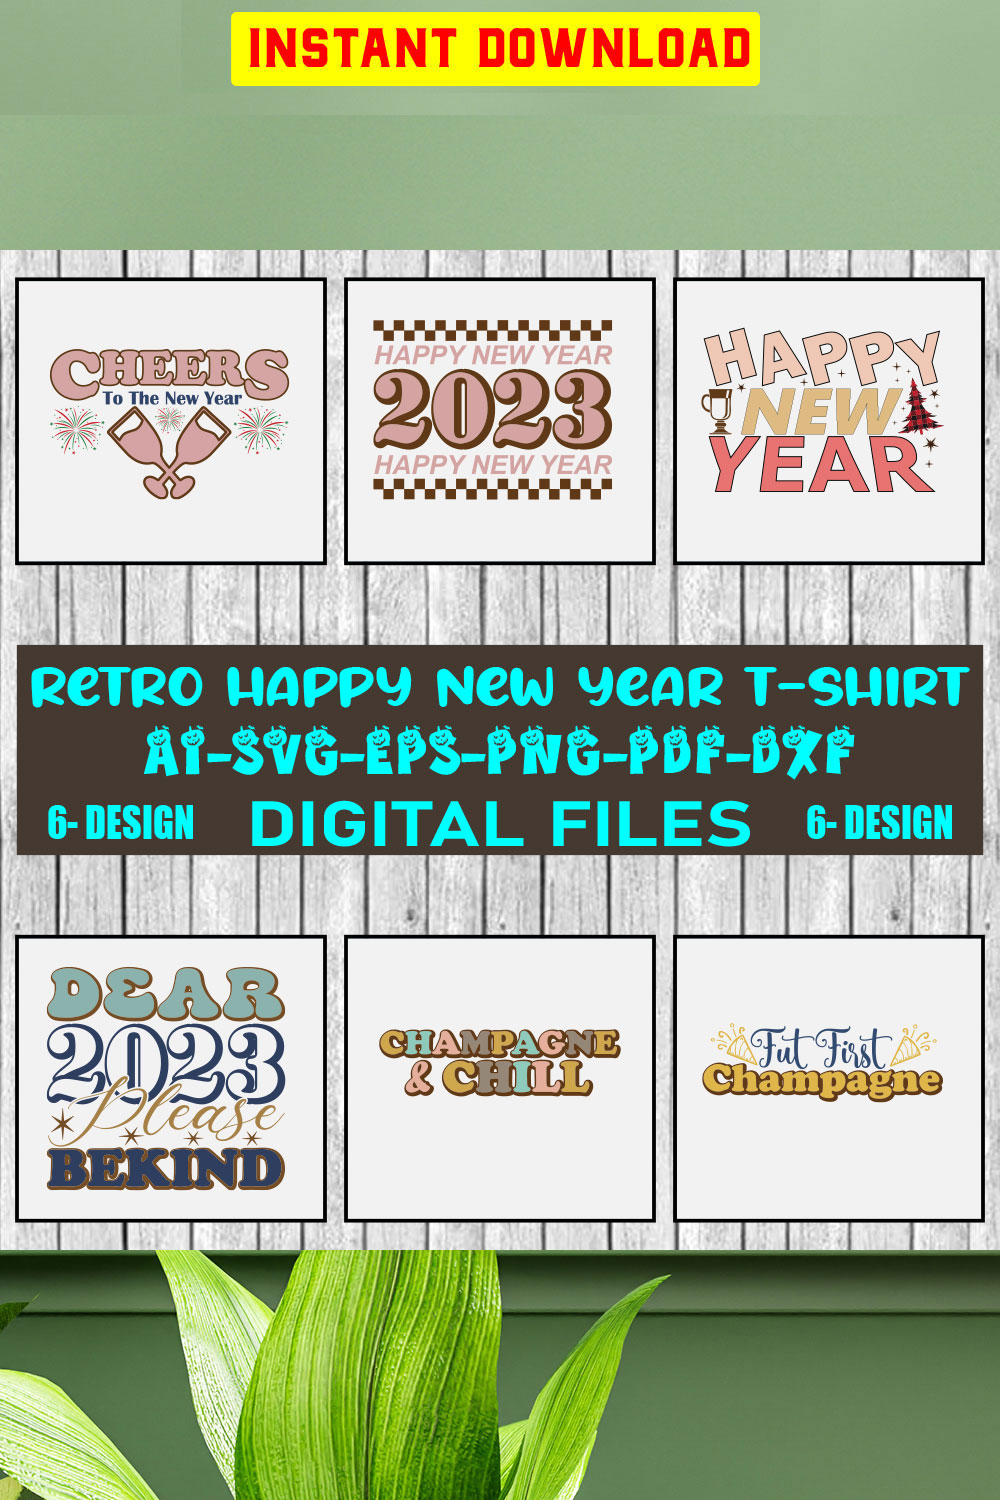 Retro Happy New Year pinterest preview image.